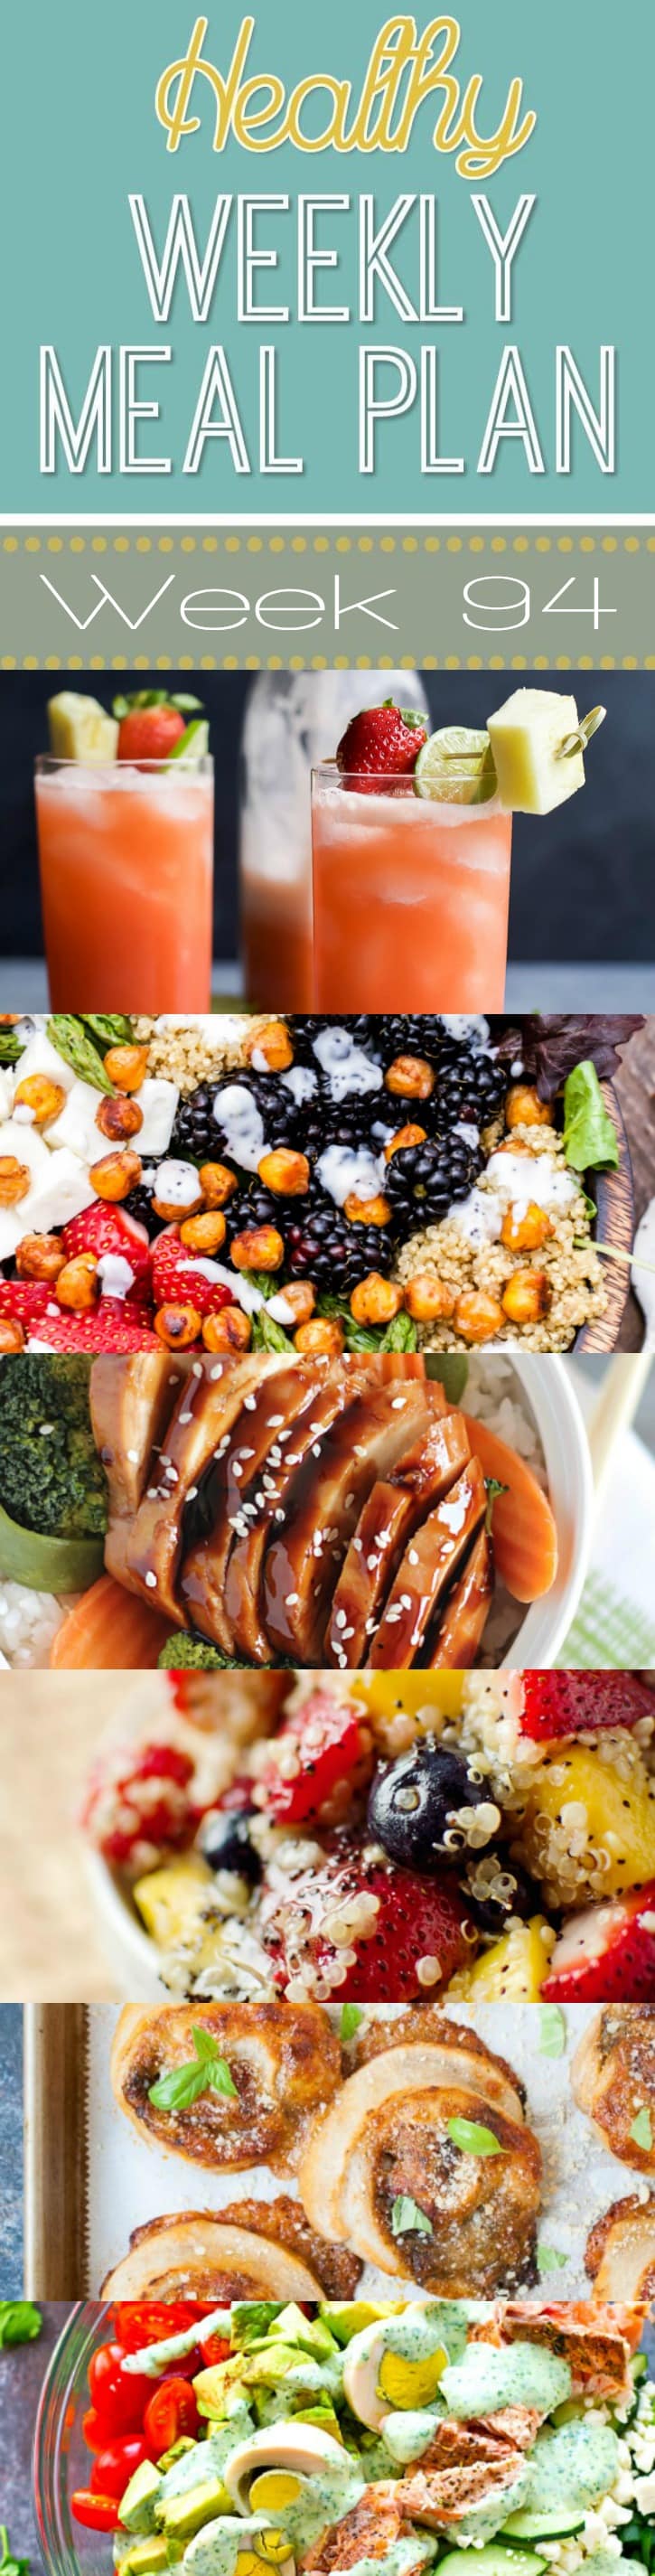 Healthy Weekly Meal Plan #94 will help you plan out your healthy dinner recipes for the whole week PLUS a healthy breakfast, lunch, side dish and dessert! :) via @jennikolaus